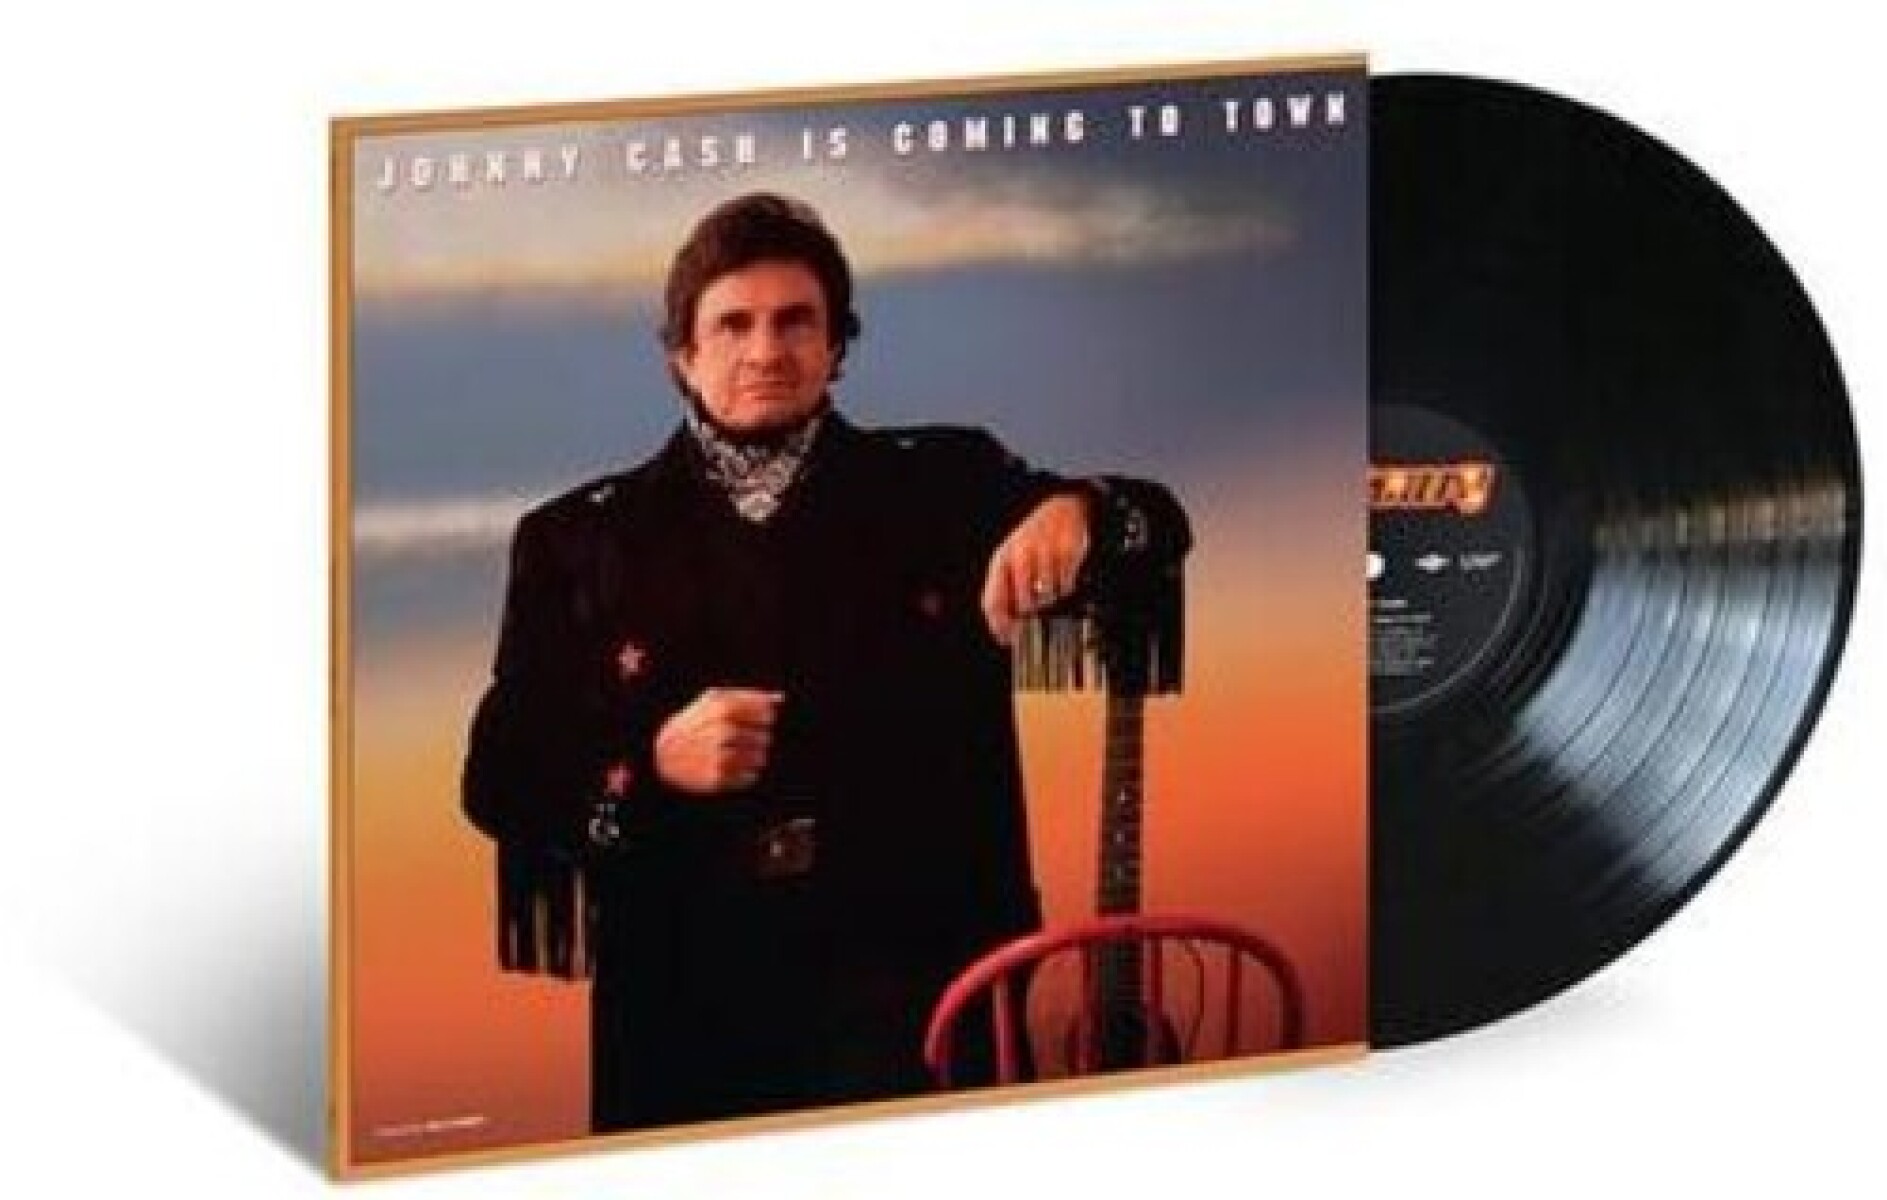 Cash Johnny - Johnny Cash Is Coming To Town - Vinilo 